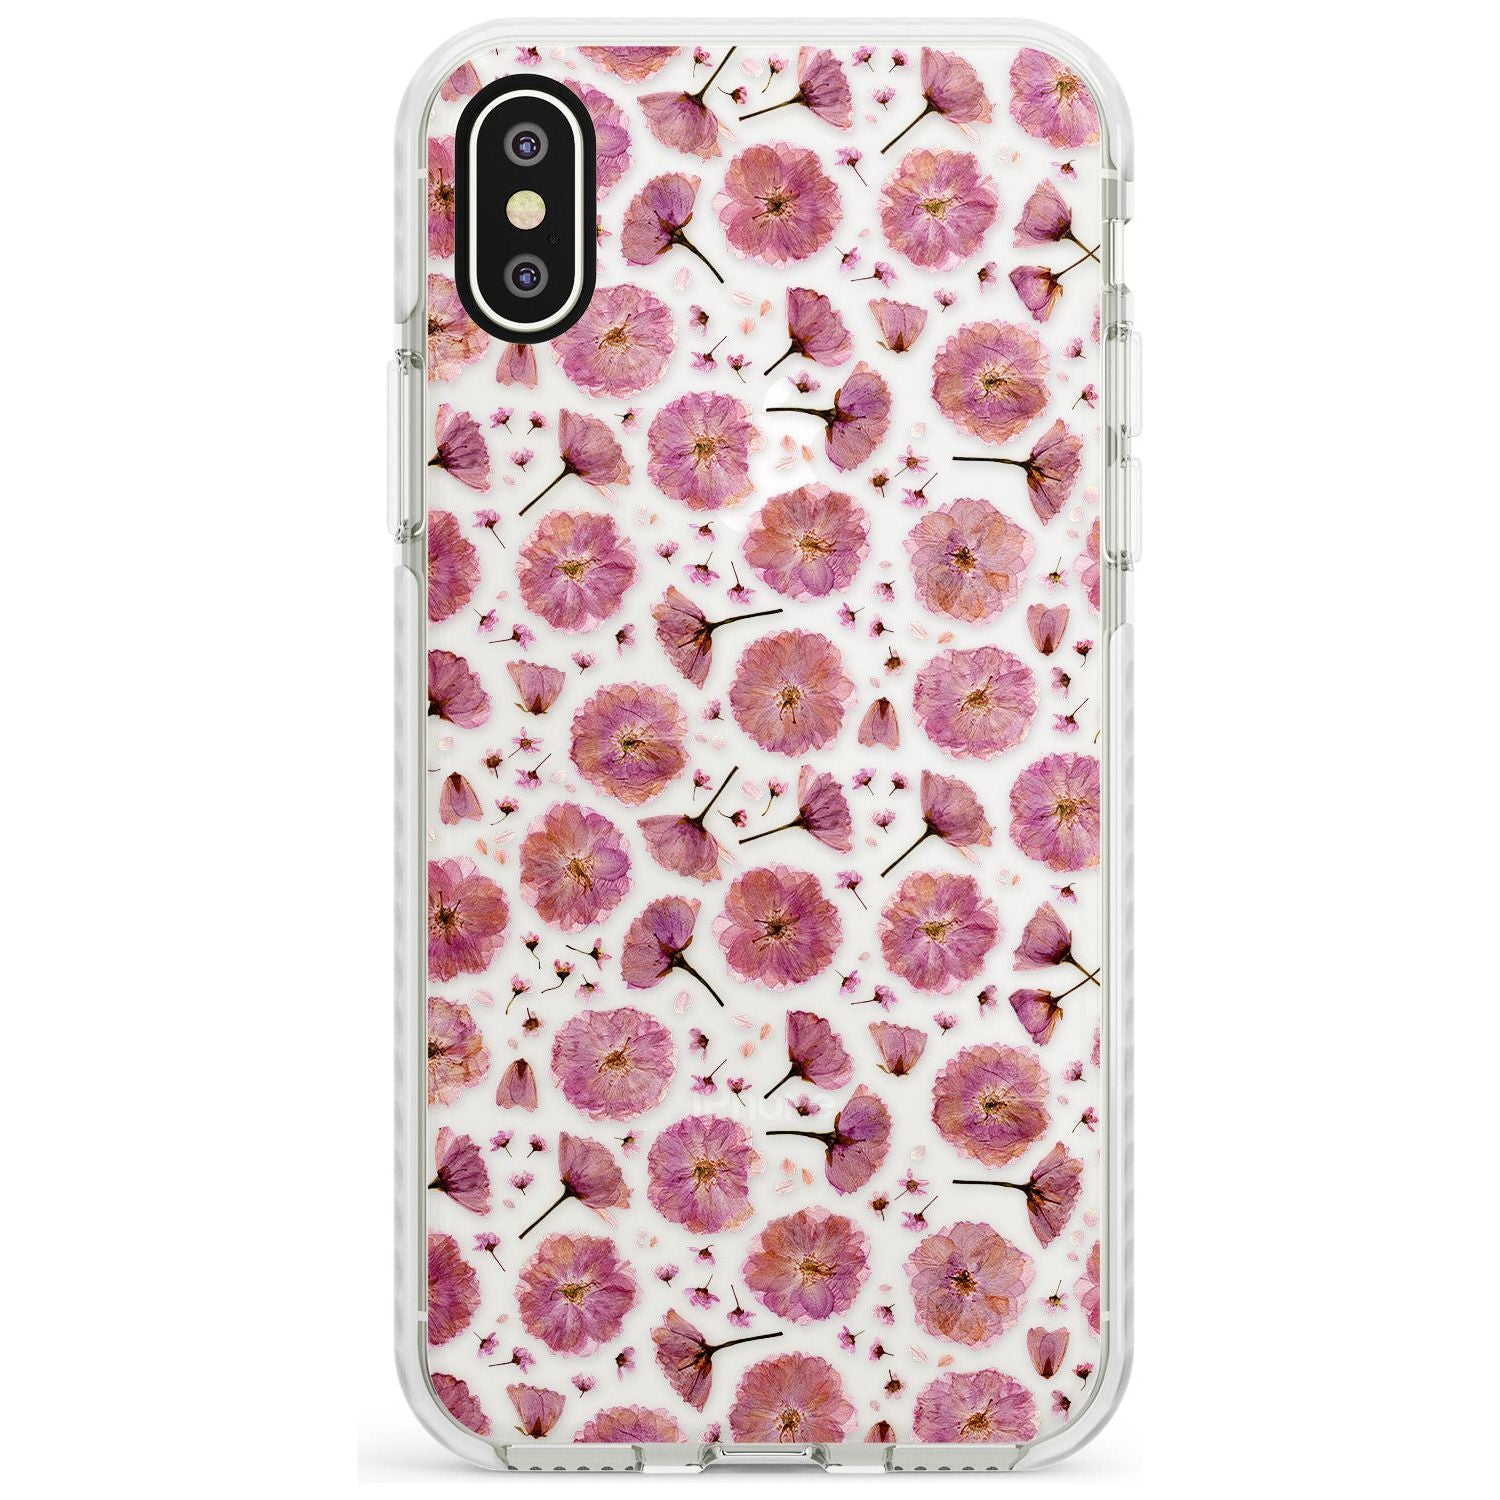 Pink Flowers & Blossoms Transparent Design Impact Phone Case for iPhone X XS Max XR